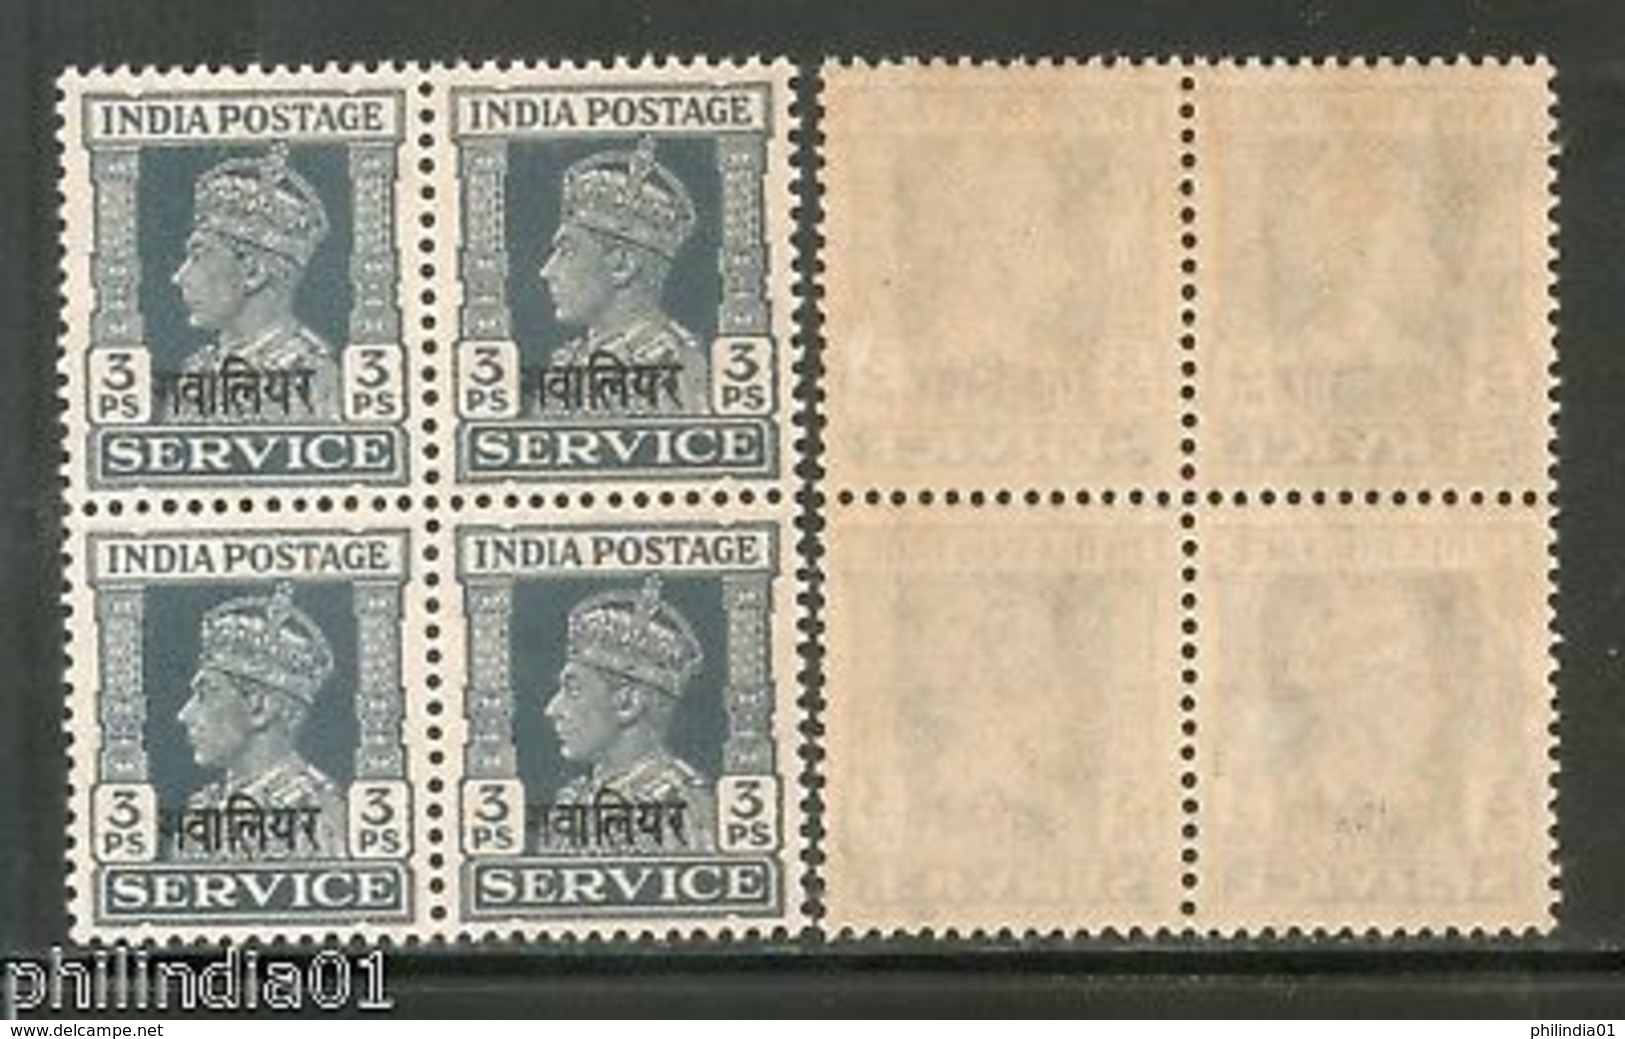 India Gwalior State KG VI 3ps Service Stamp SG O80 / Sc O52 BLK/4 MNH - Gwalior